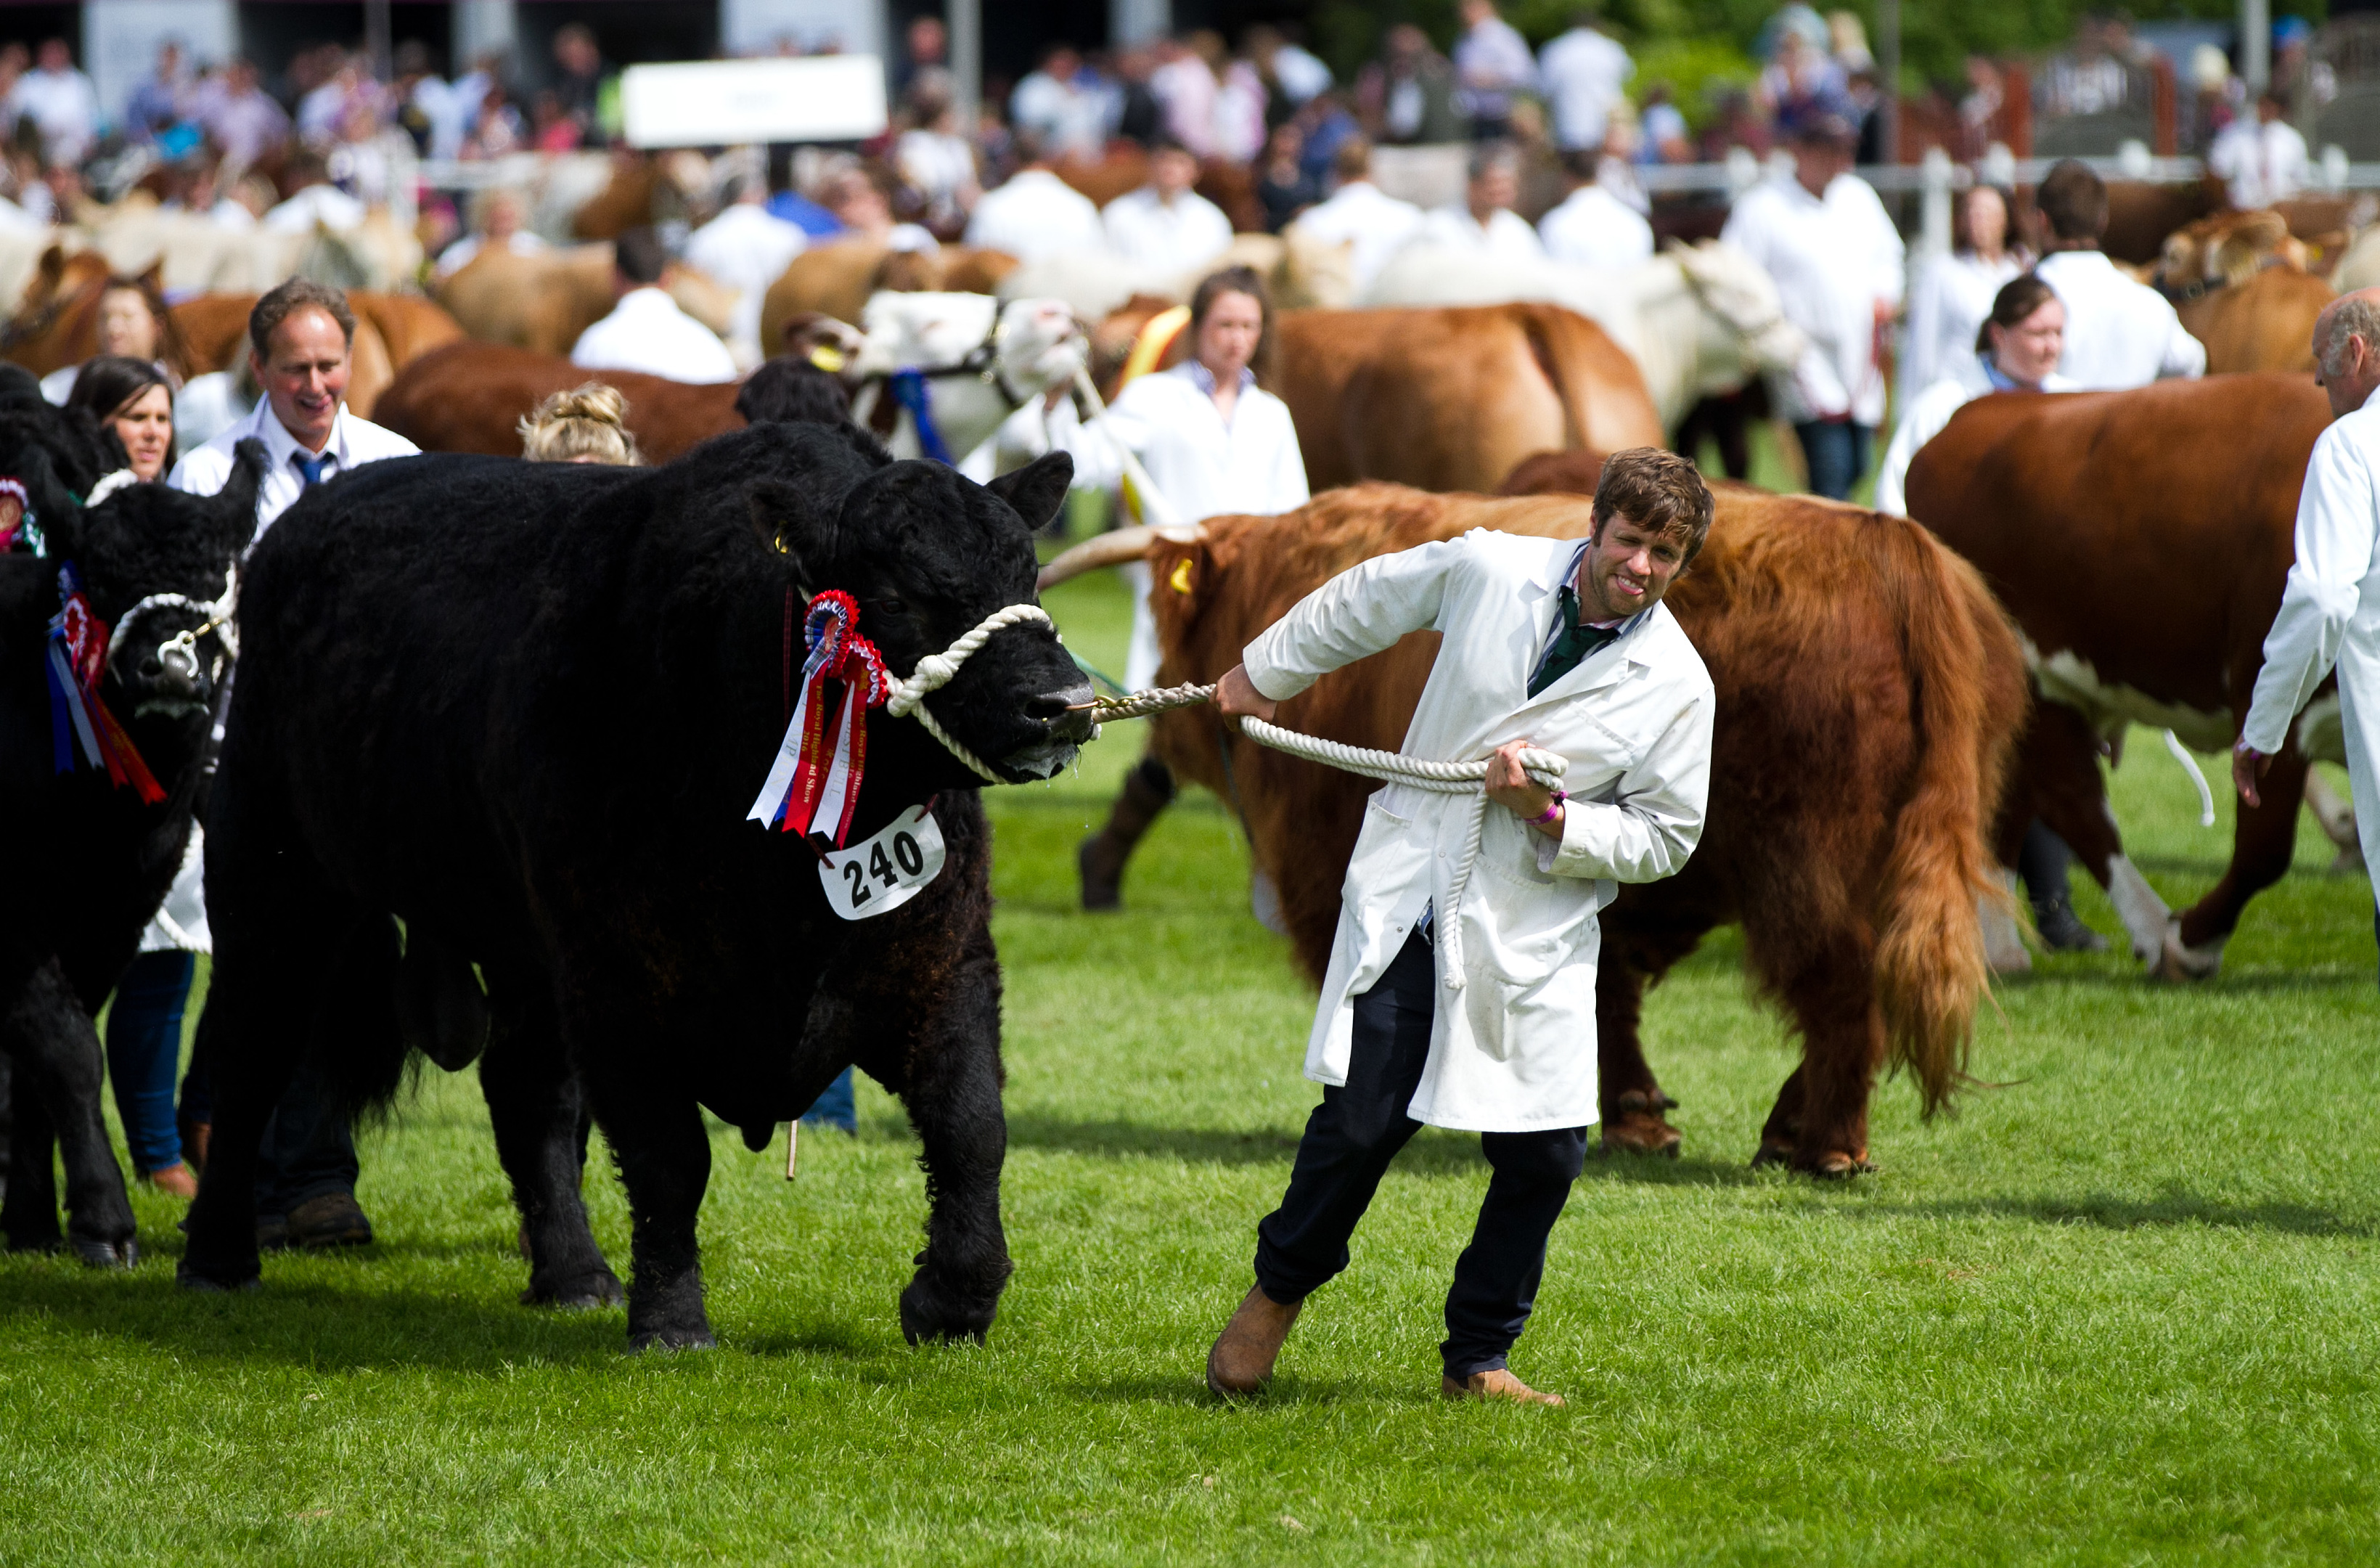 For exhibitors the show is about the prospect of glory, a big shiny trophy and a share of the £180,000 prize money.